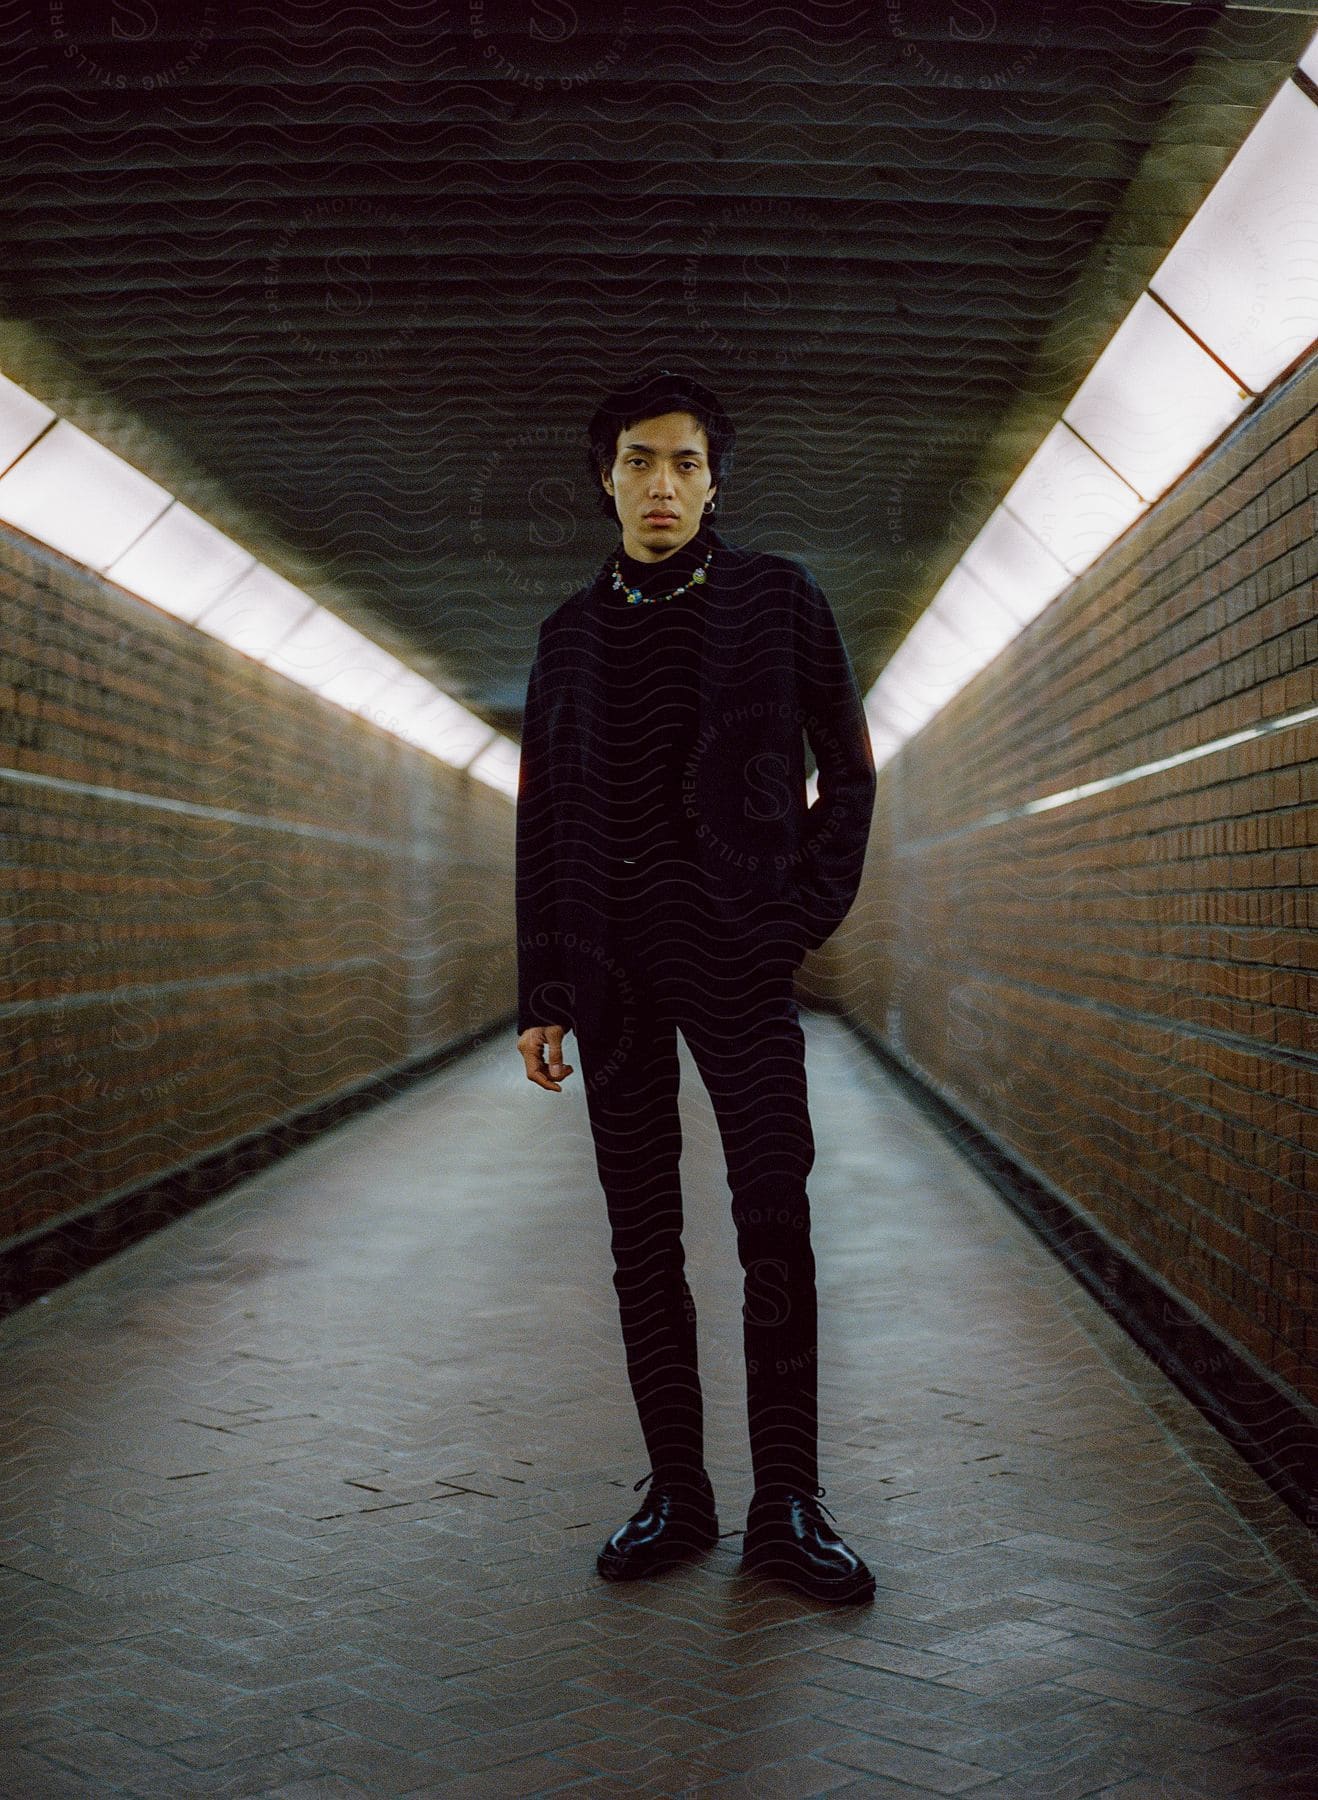 A suited man in black, hands in pockets, stands alone in a tunnel.